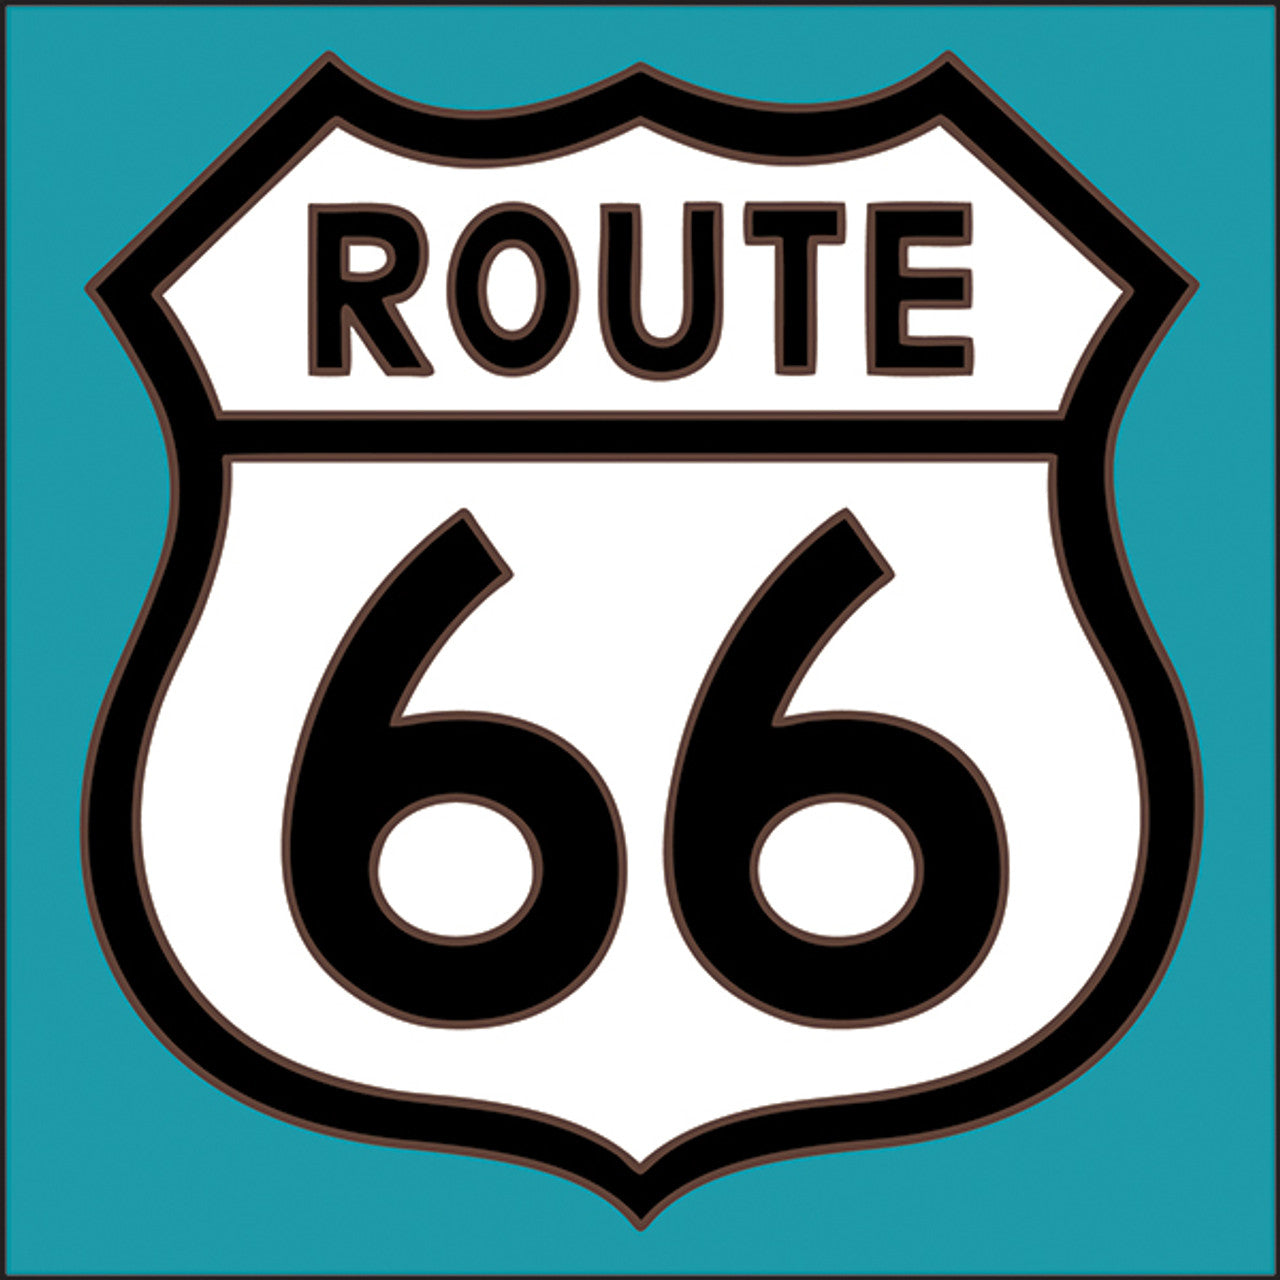 Route 66 Turquoise Background Tile